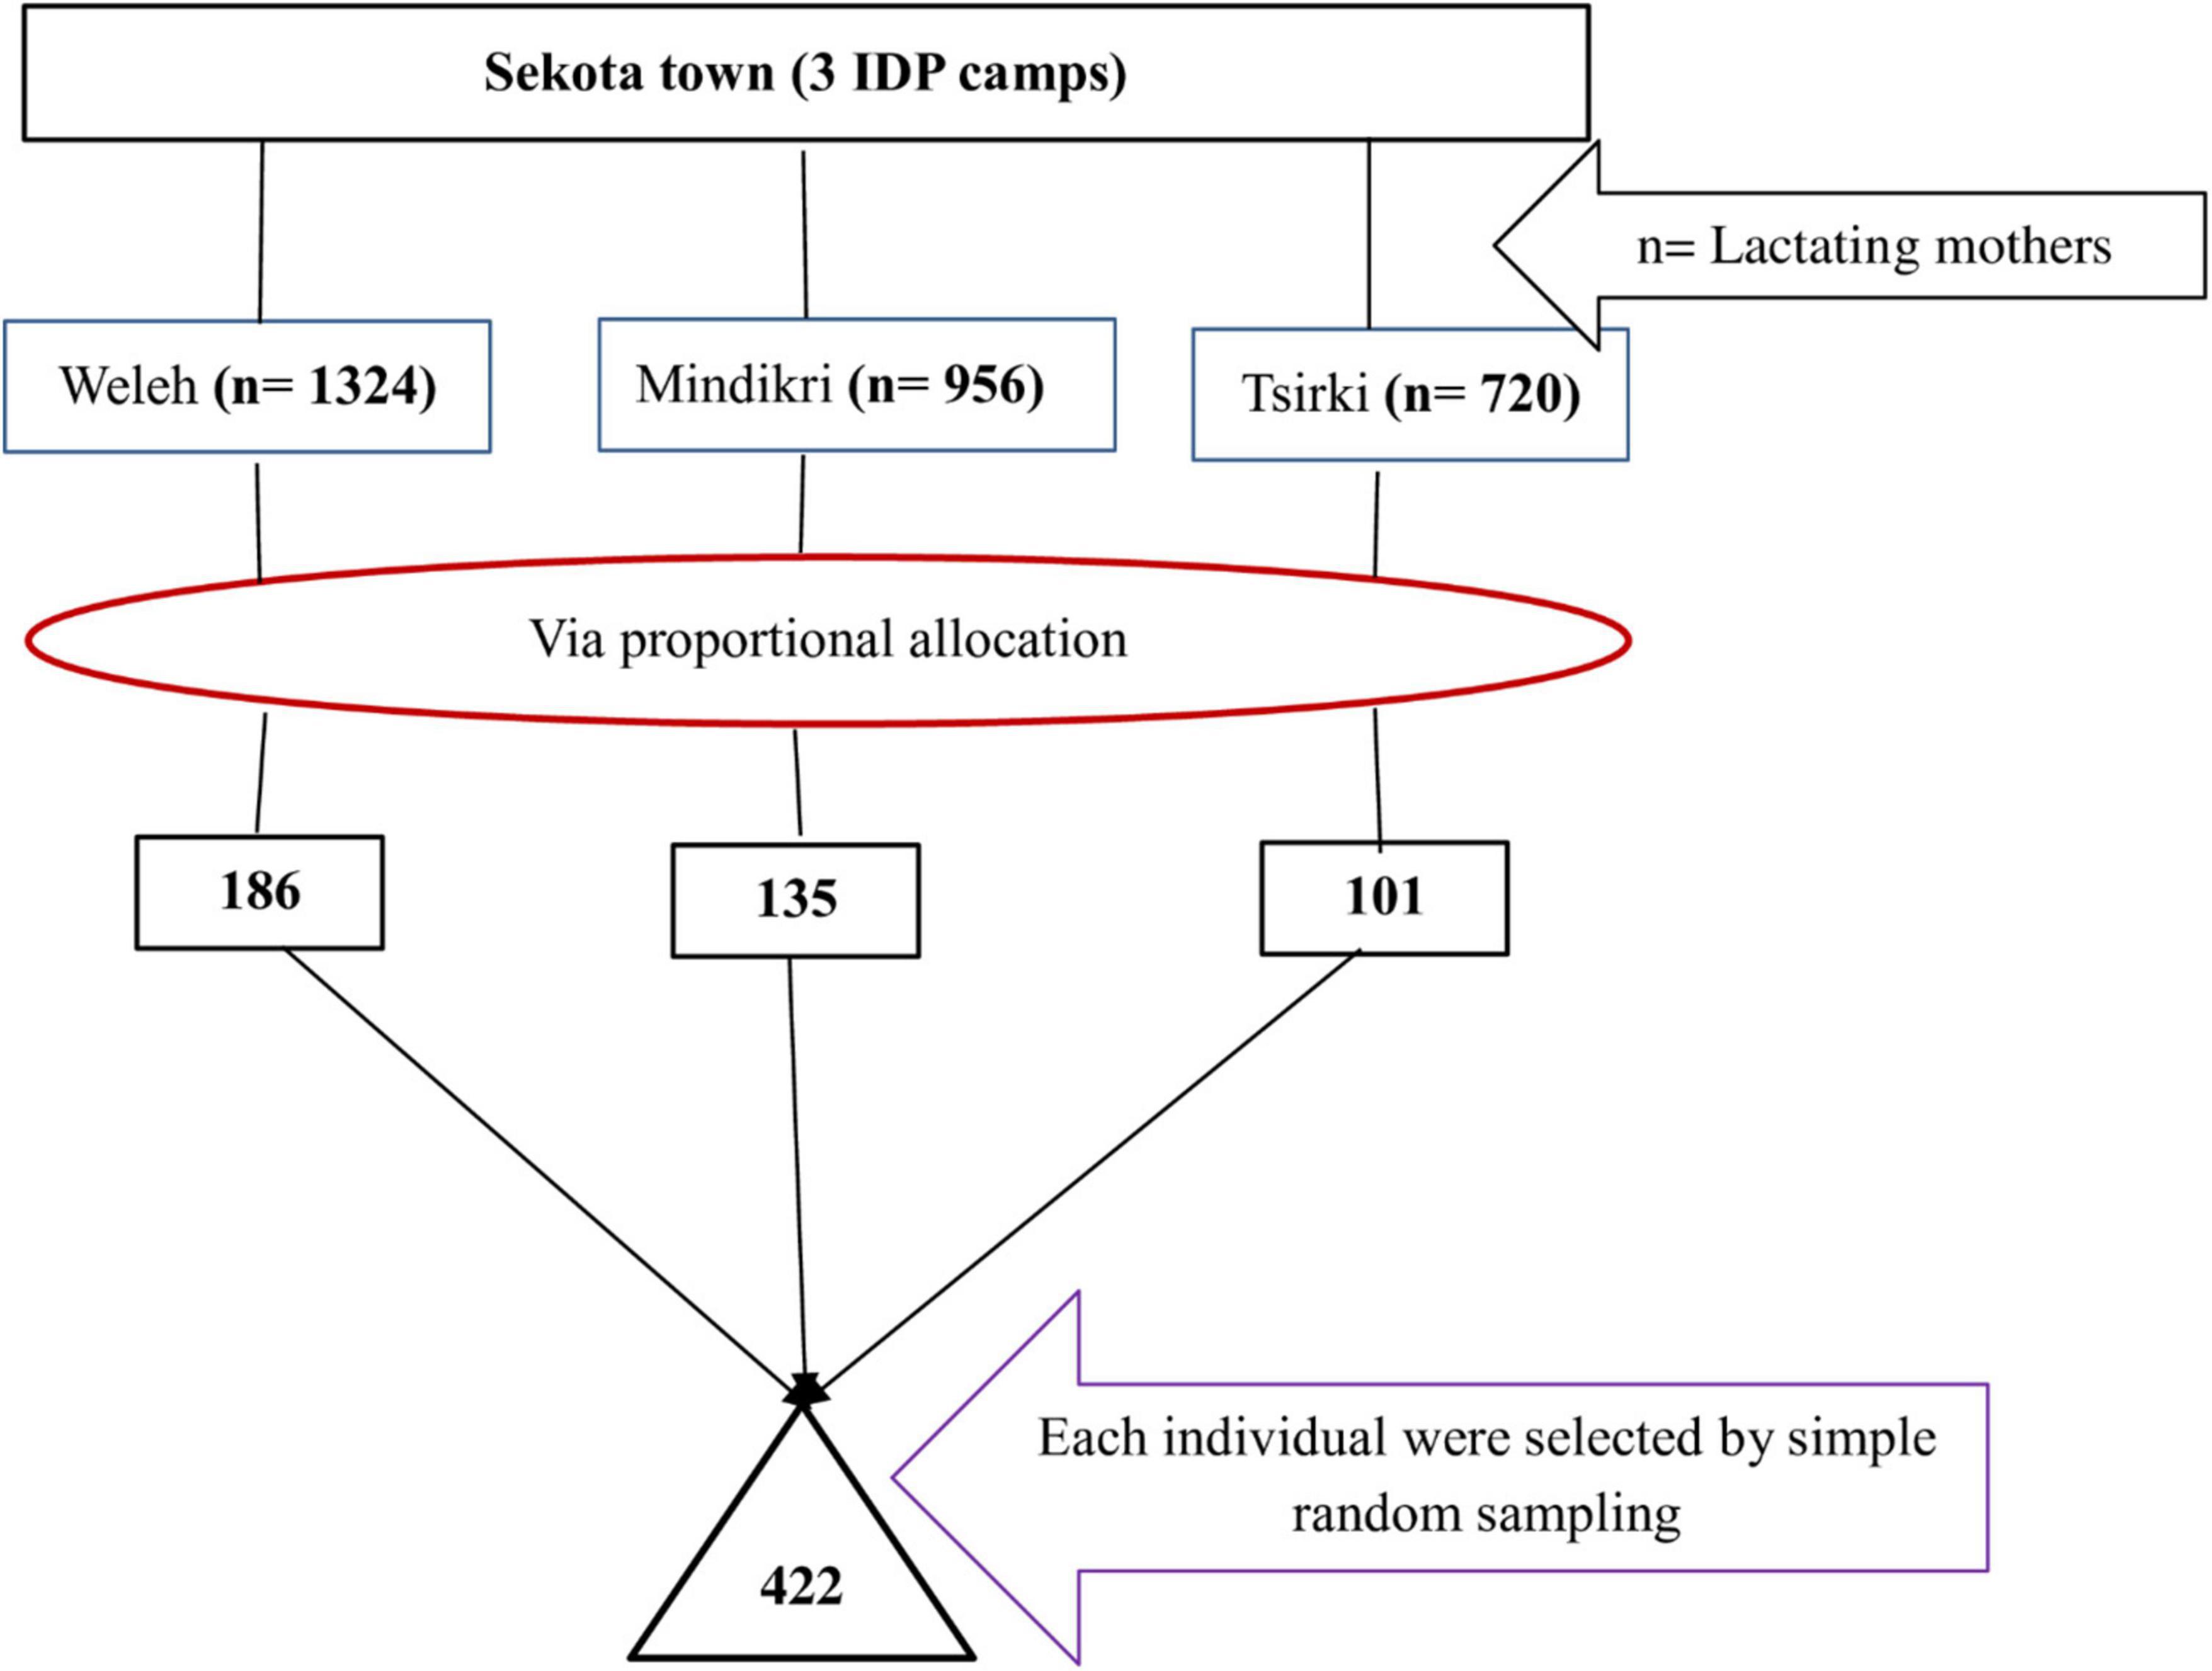 Undernutrition and associated factors among internally displaced lactating mothers in Sekota camps, northern Ethiopia: A cross-sectional study